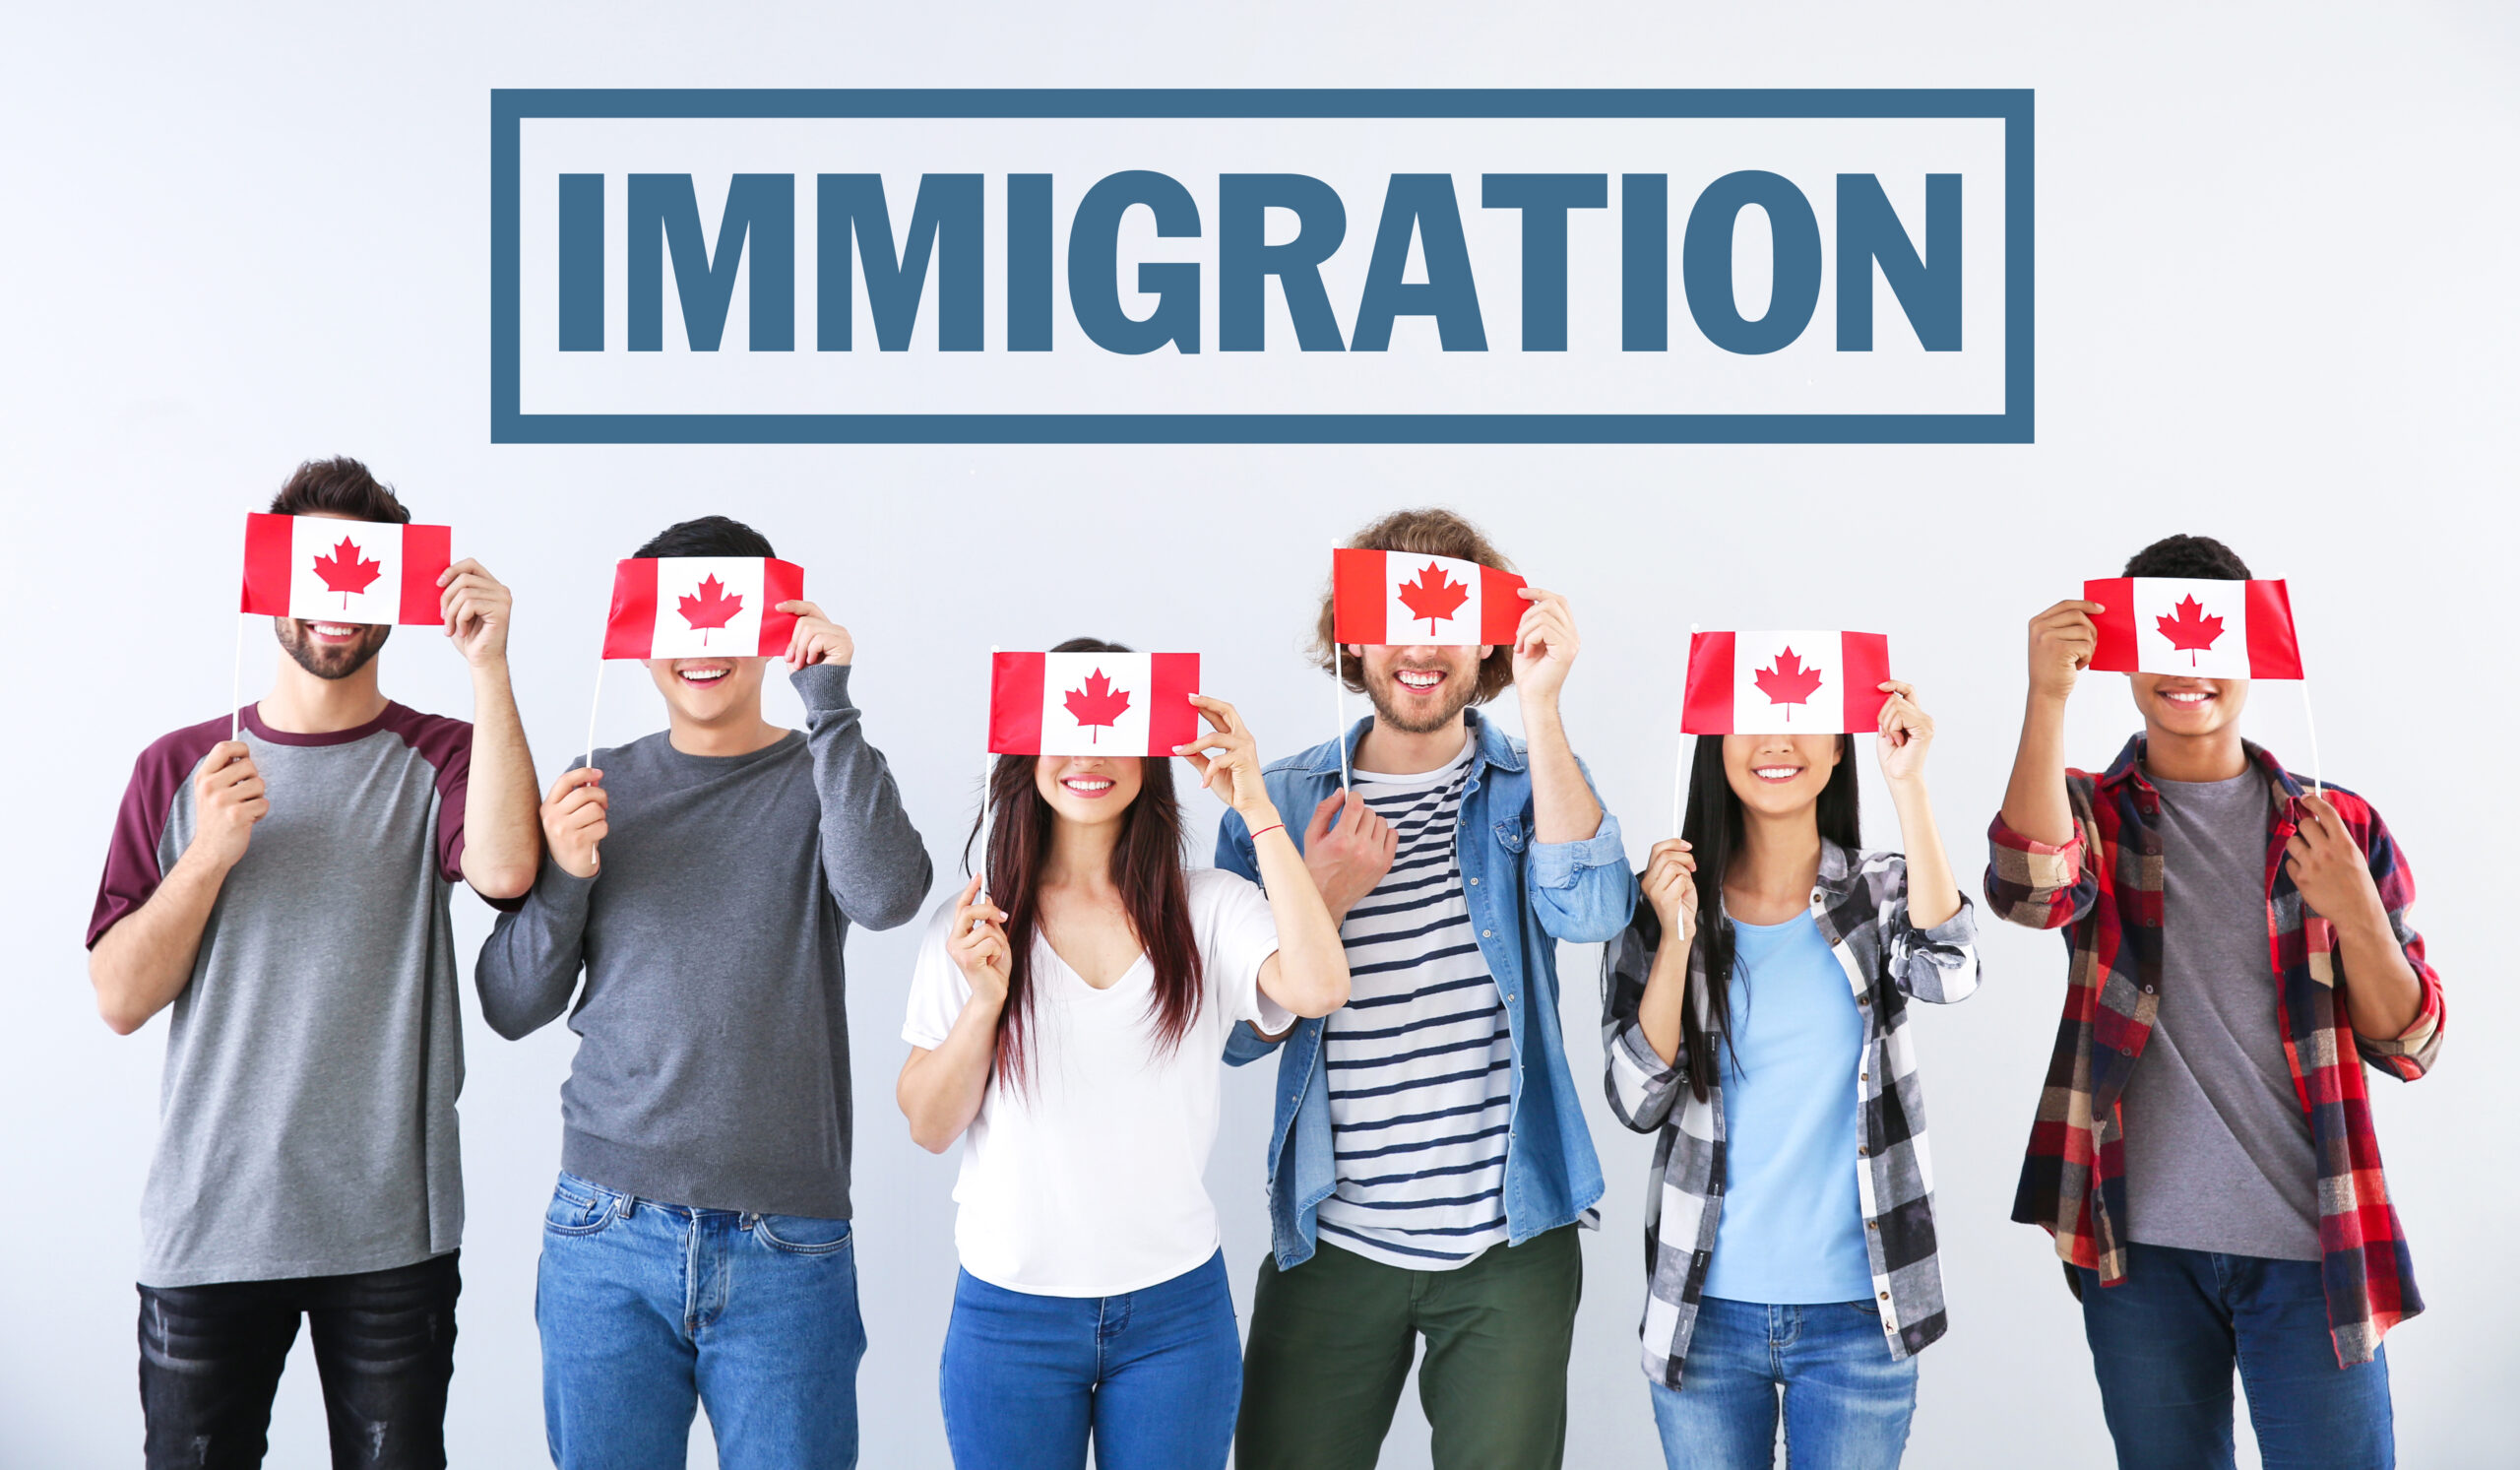 Group,Of,Students,With,Canadian,Flags,And,Word,Immigration,On